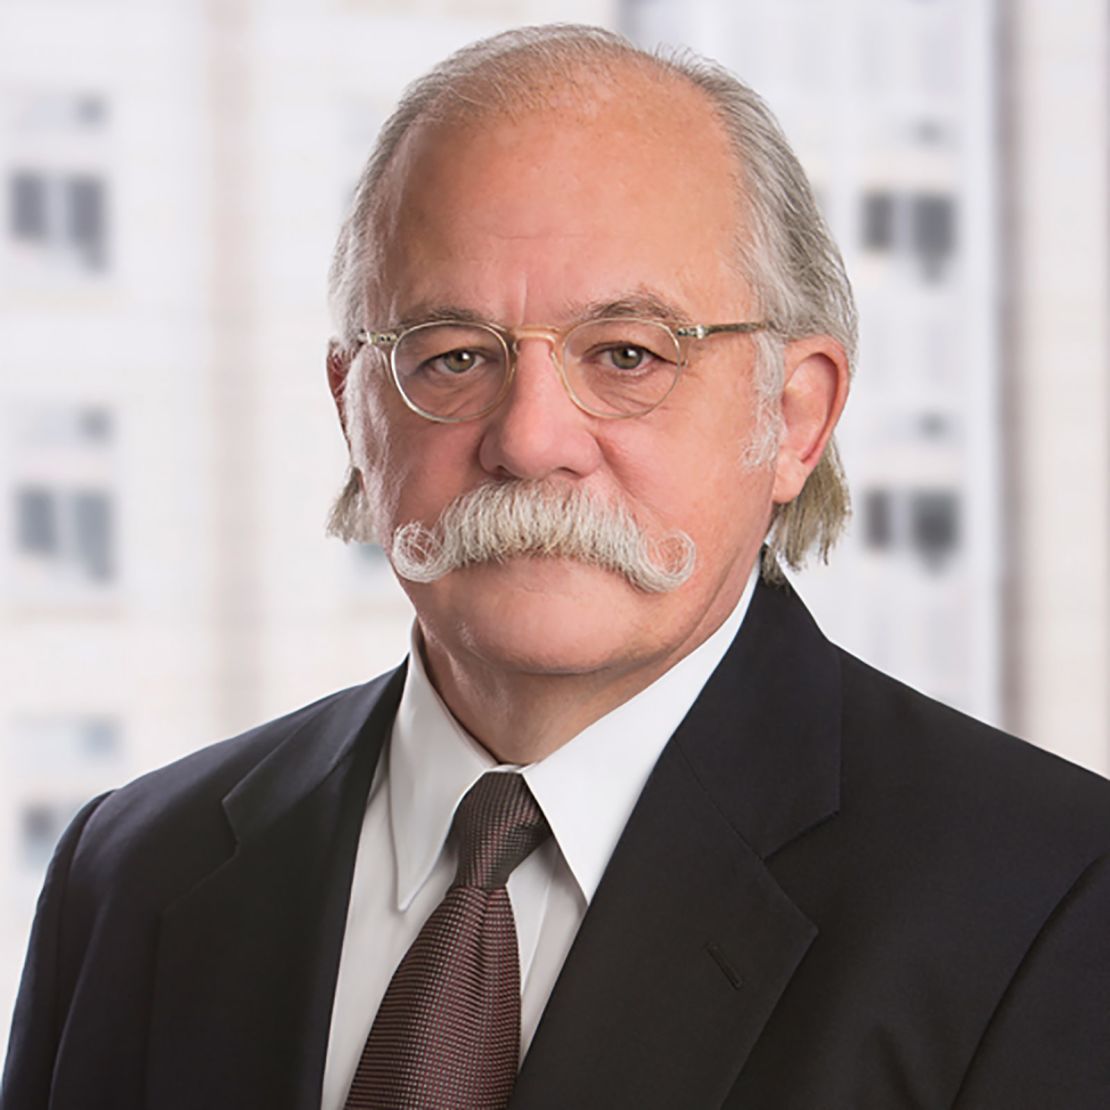 Ty Cobb, the Trump lawyer and flamboyant mustache wearer.